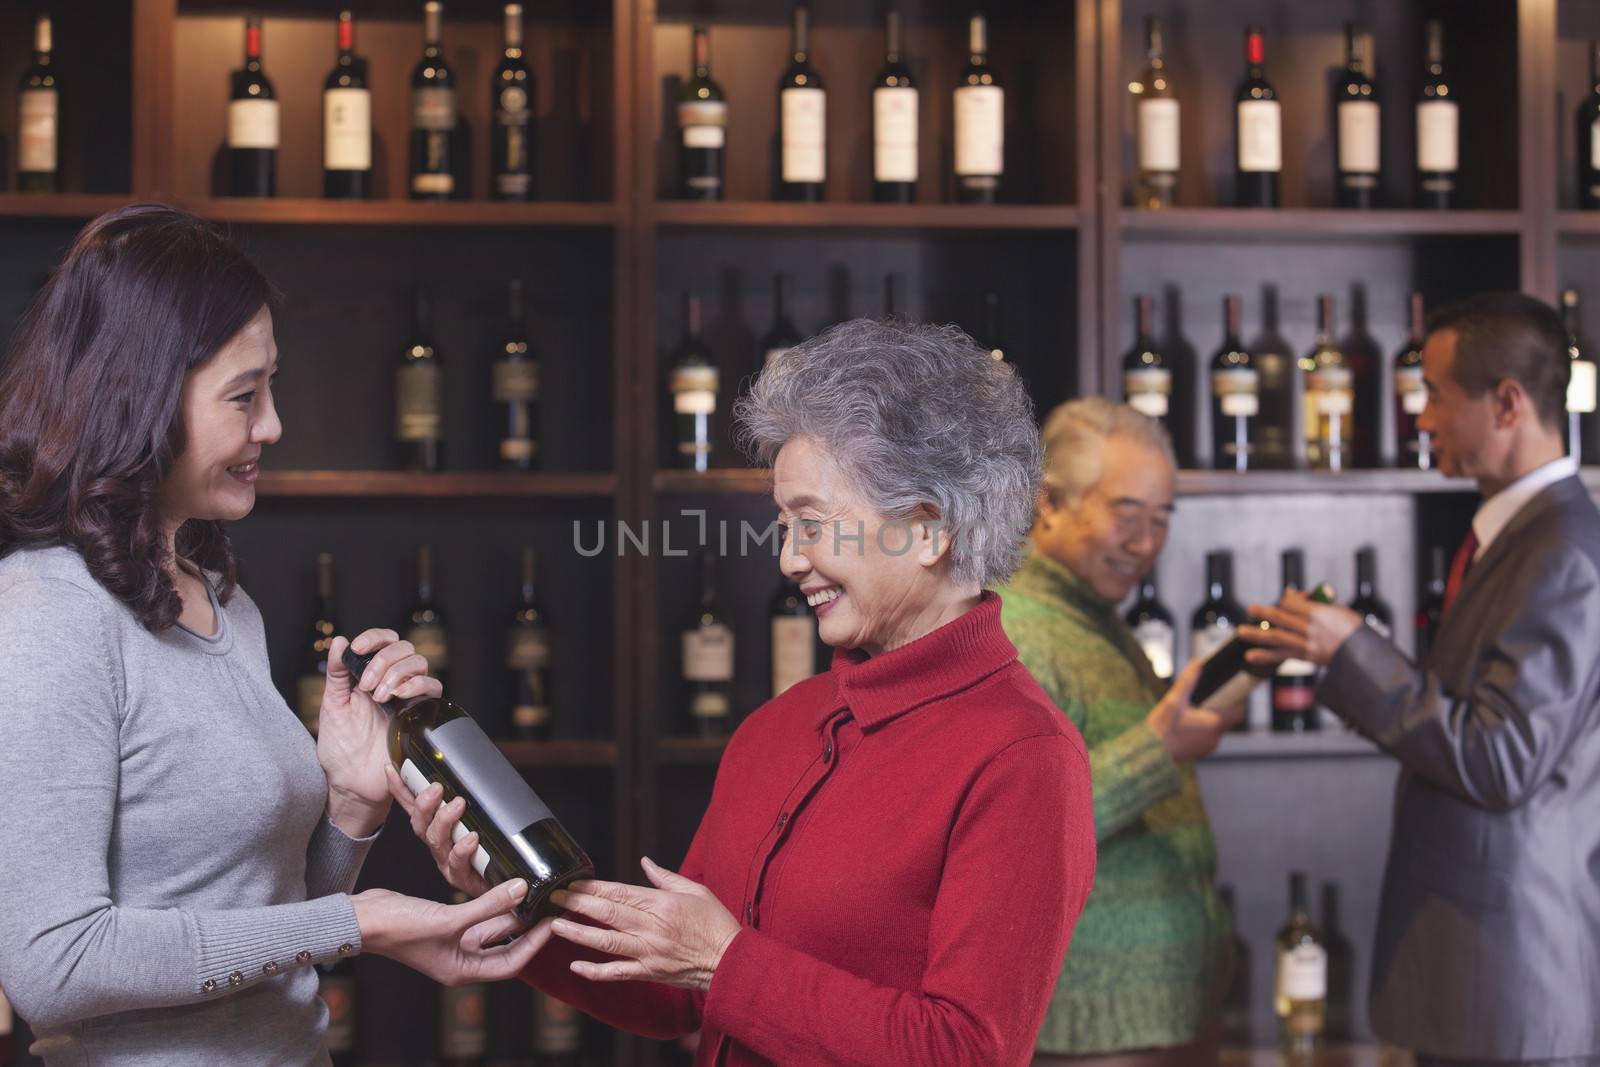 People Examining Wine Bottles, Two Women in the Foreground by XiXinXing